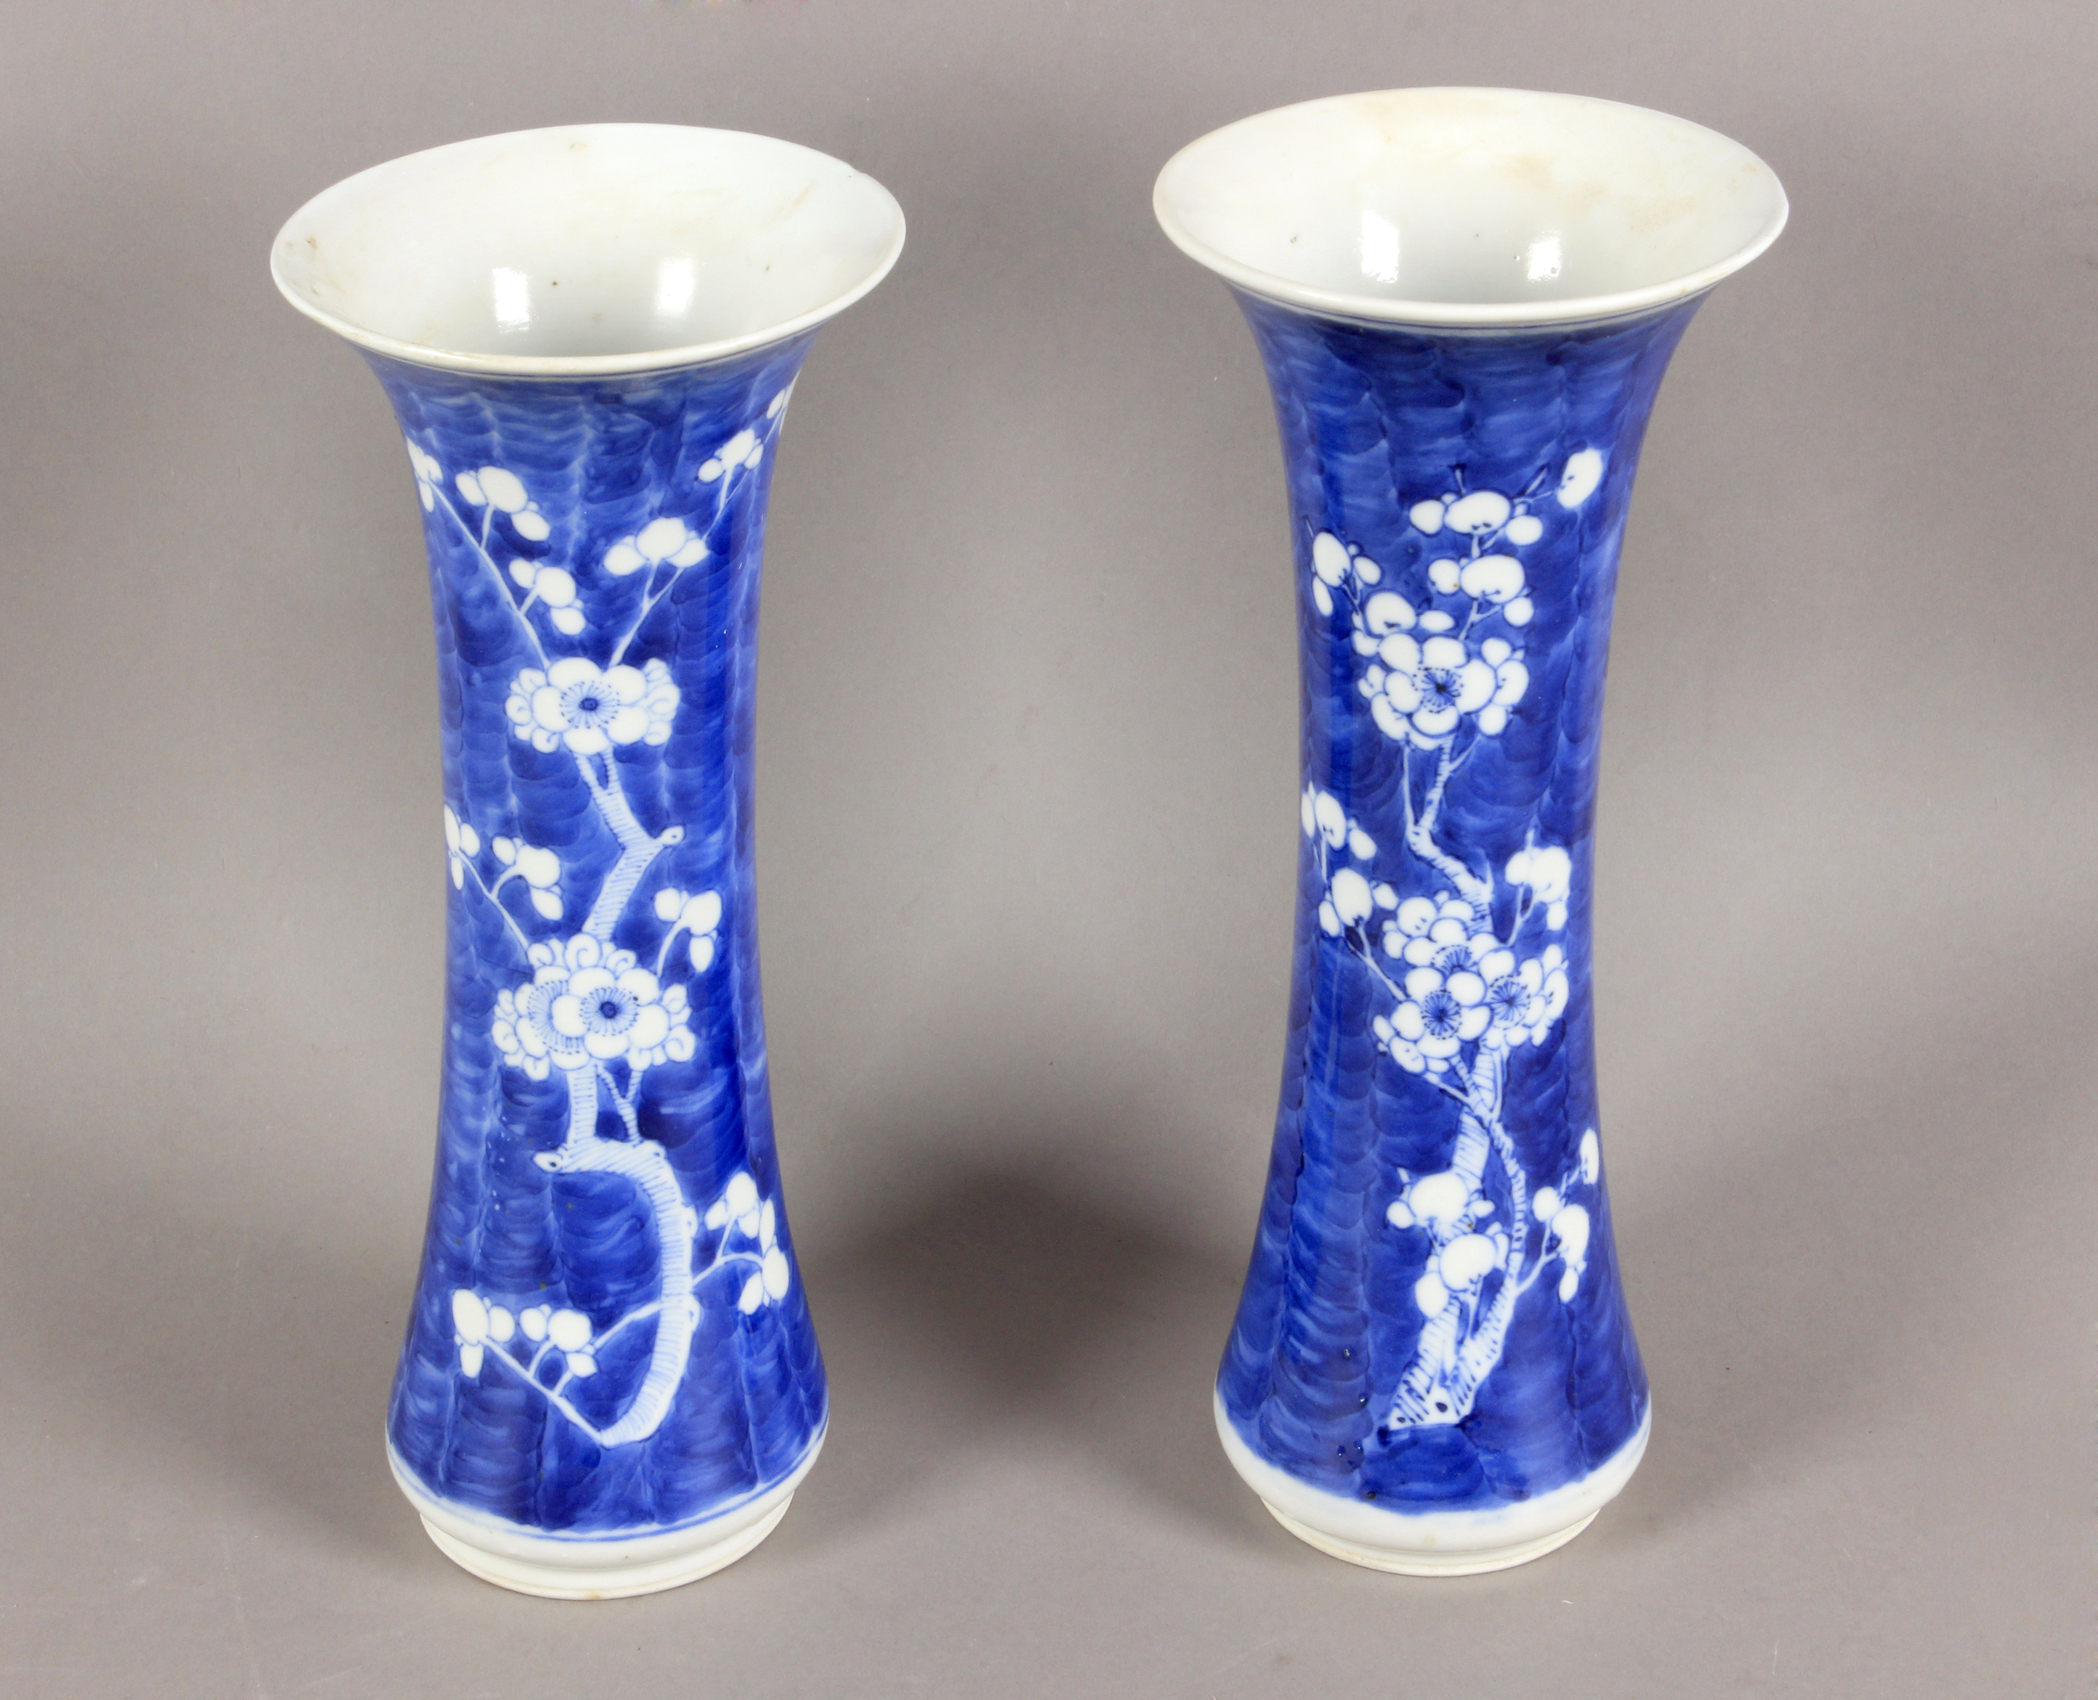 A pair of 19th century Chinese trumpet vases in white and blue porcelain